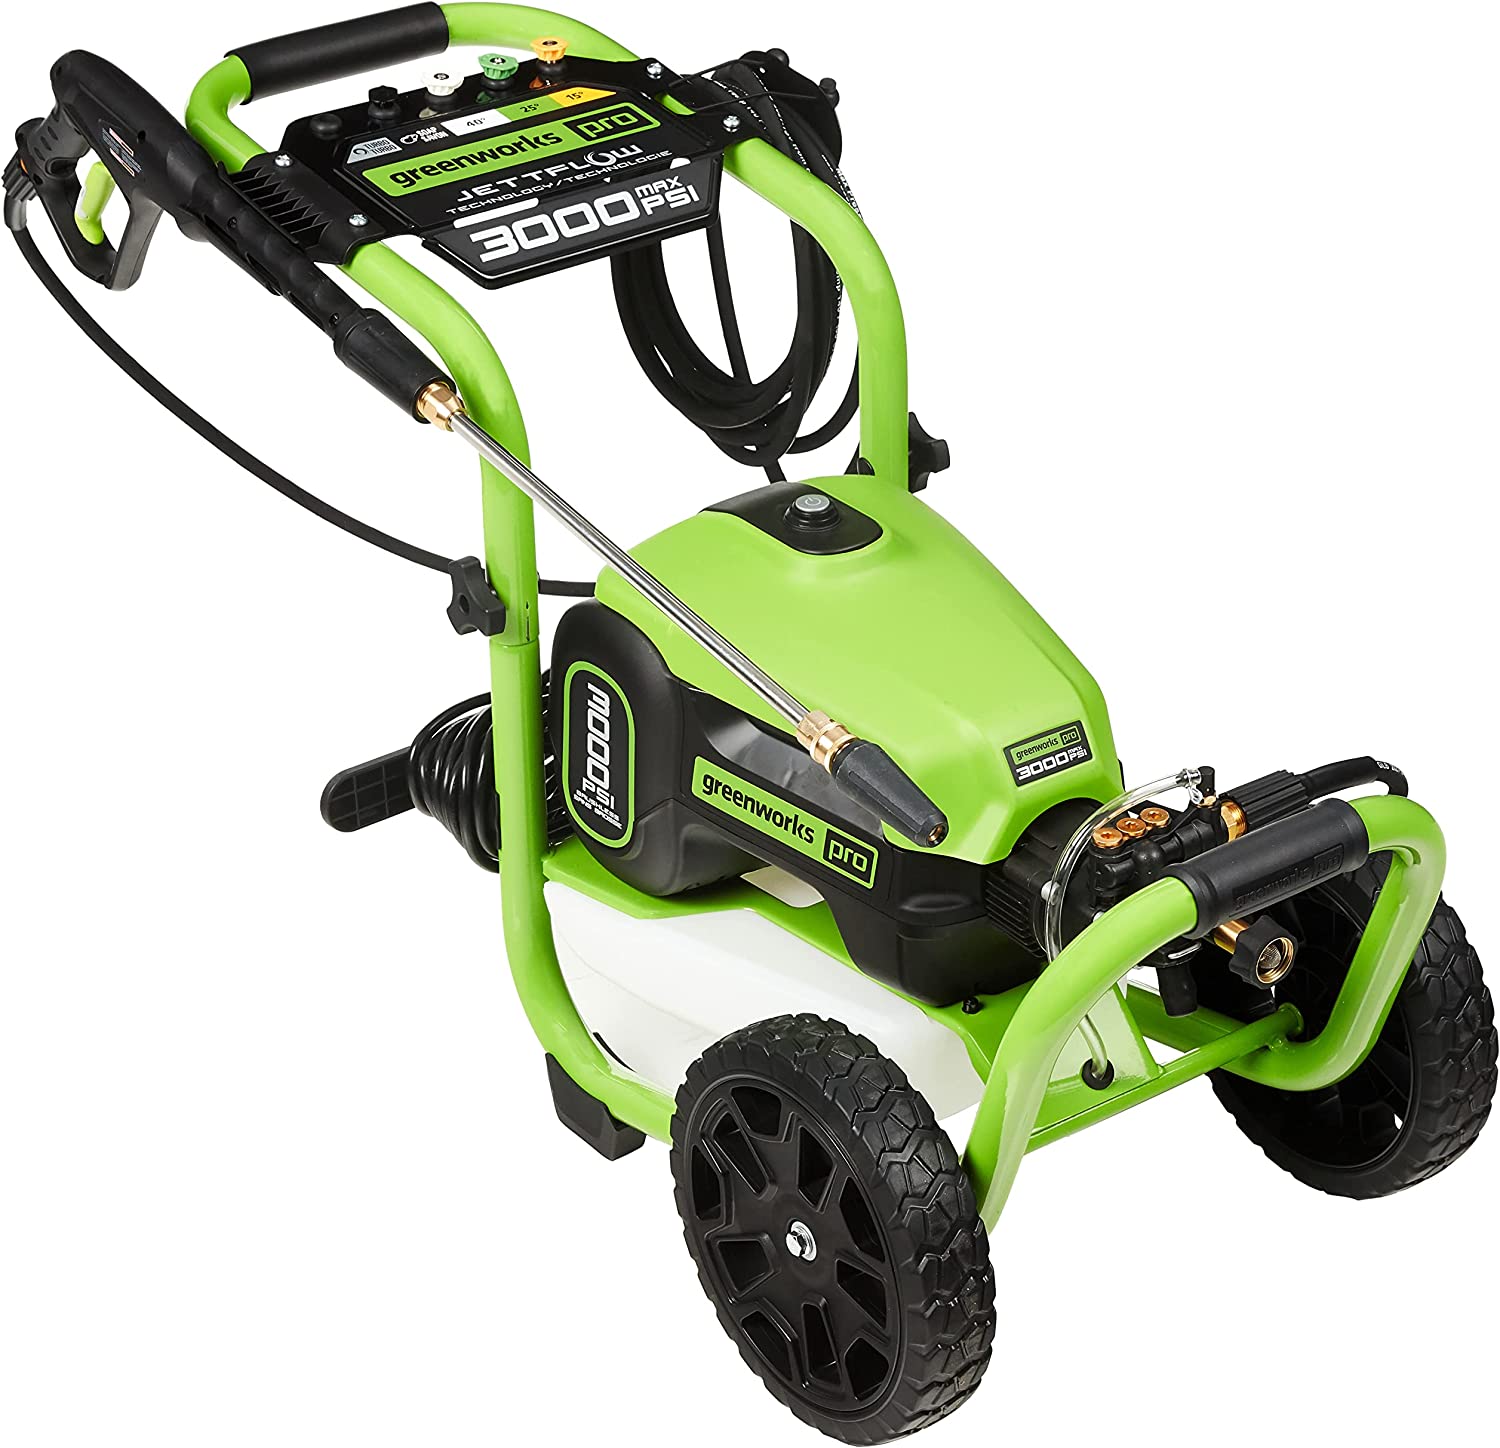 Greenworks 3000 PSI (1.1 GPM) TruBrushless Electric Pressure Washer (PWMA Certified) $328.49